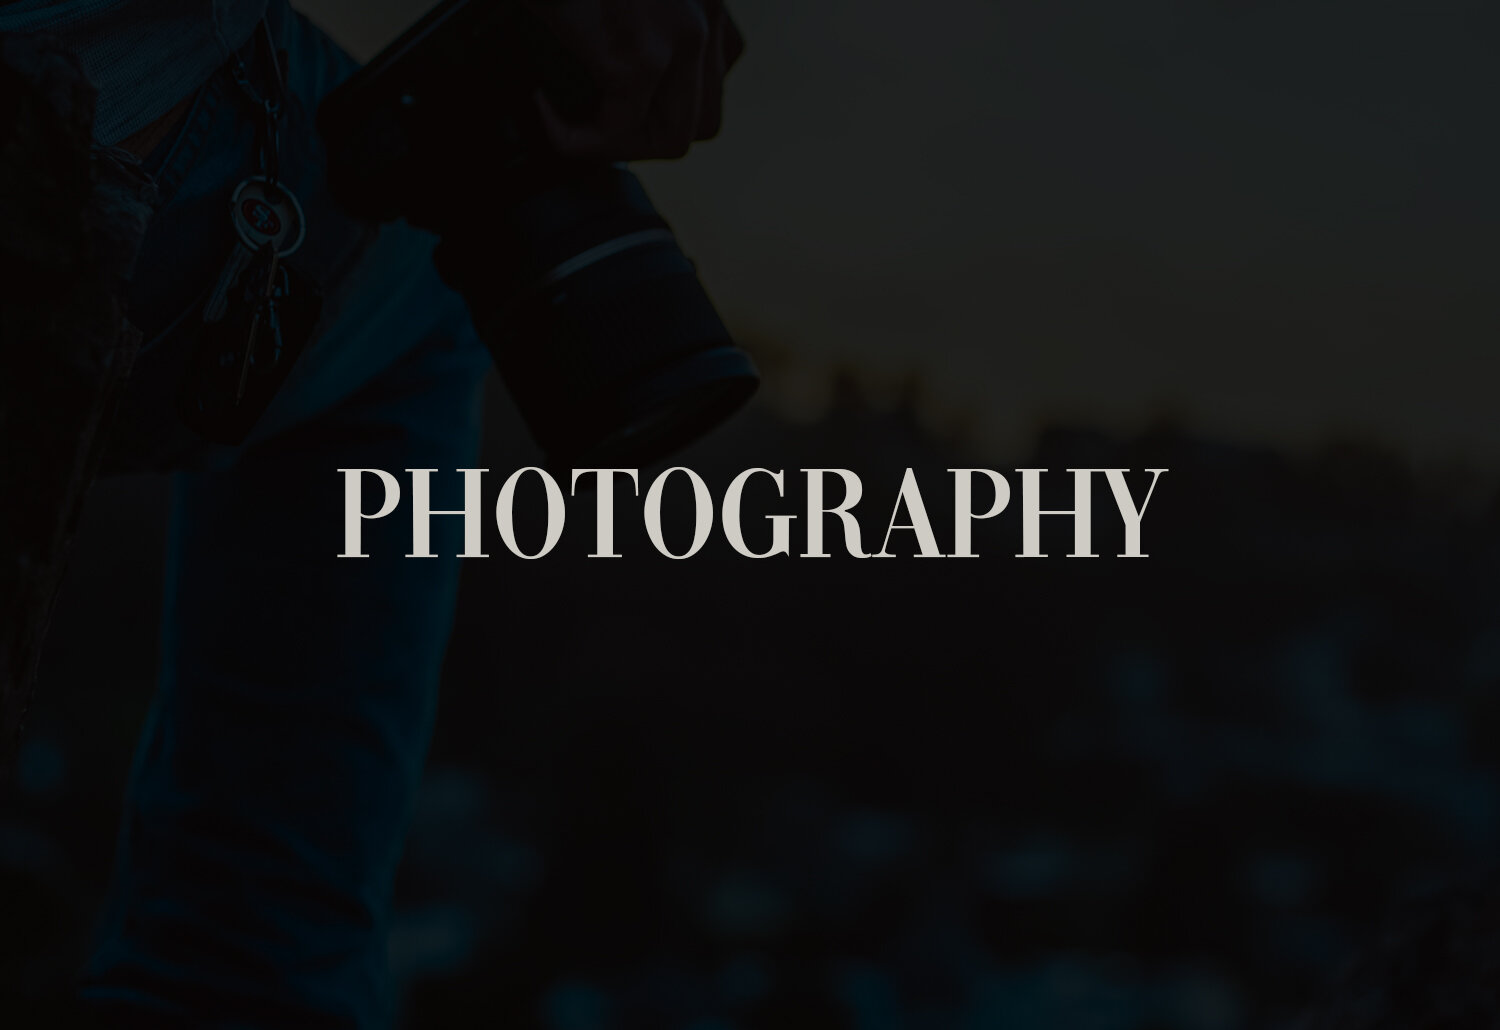  If you are in need of some photography, thirtythree visuals may be able to accomodate. Reach out and see if it is something we can help you with. 